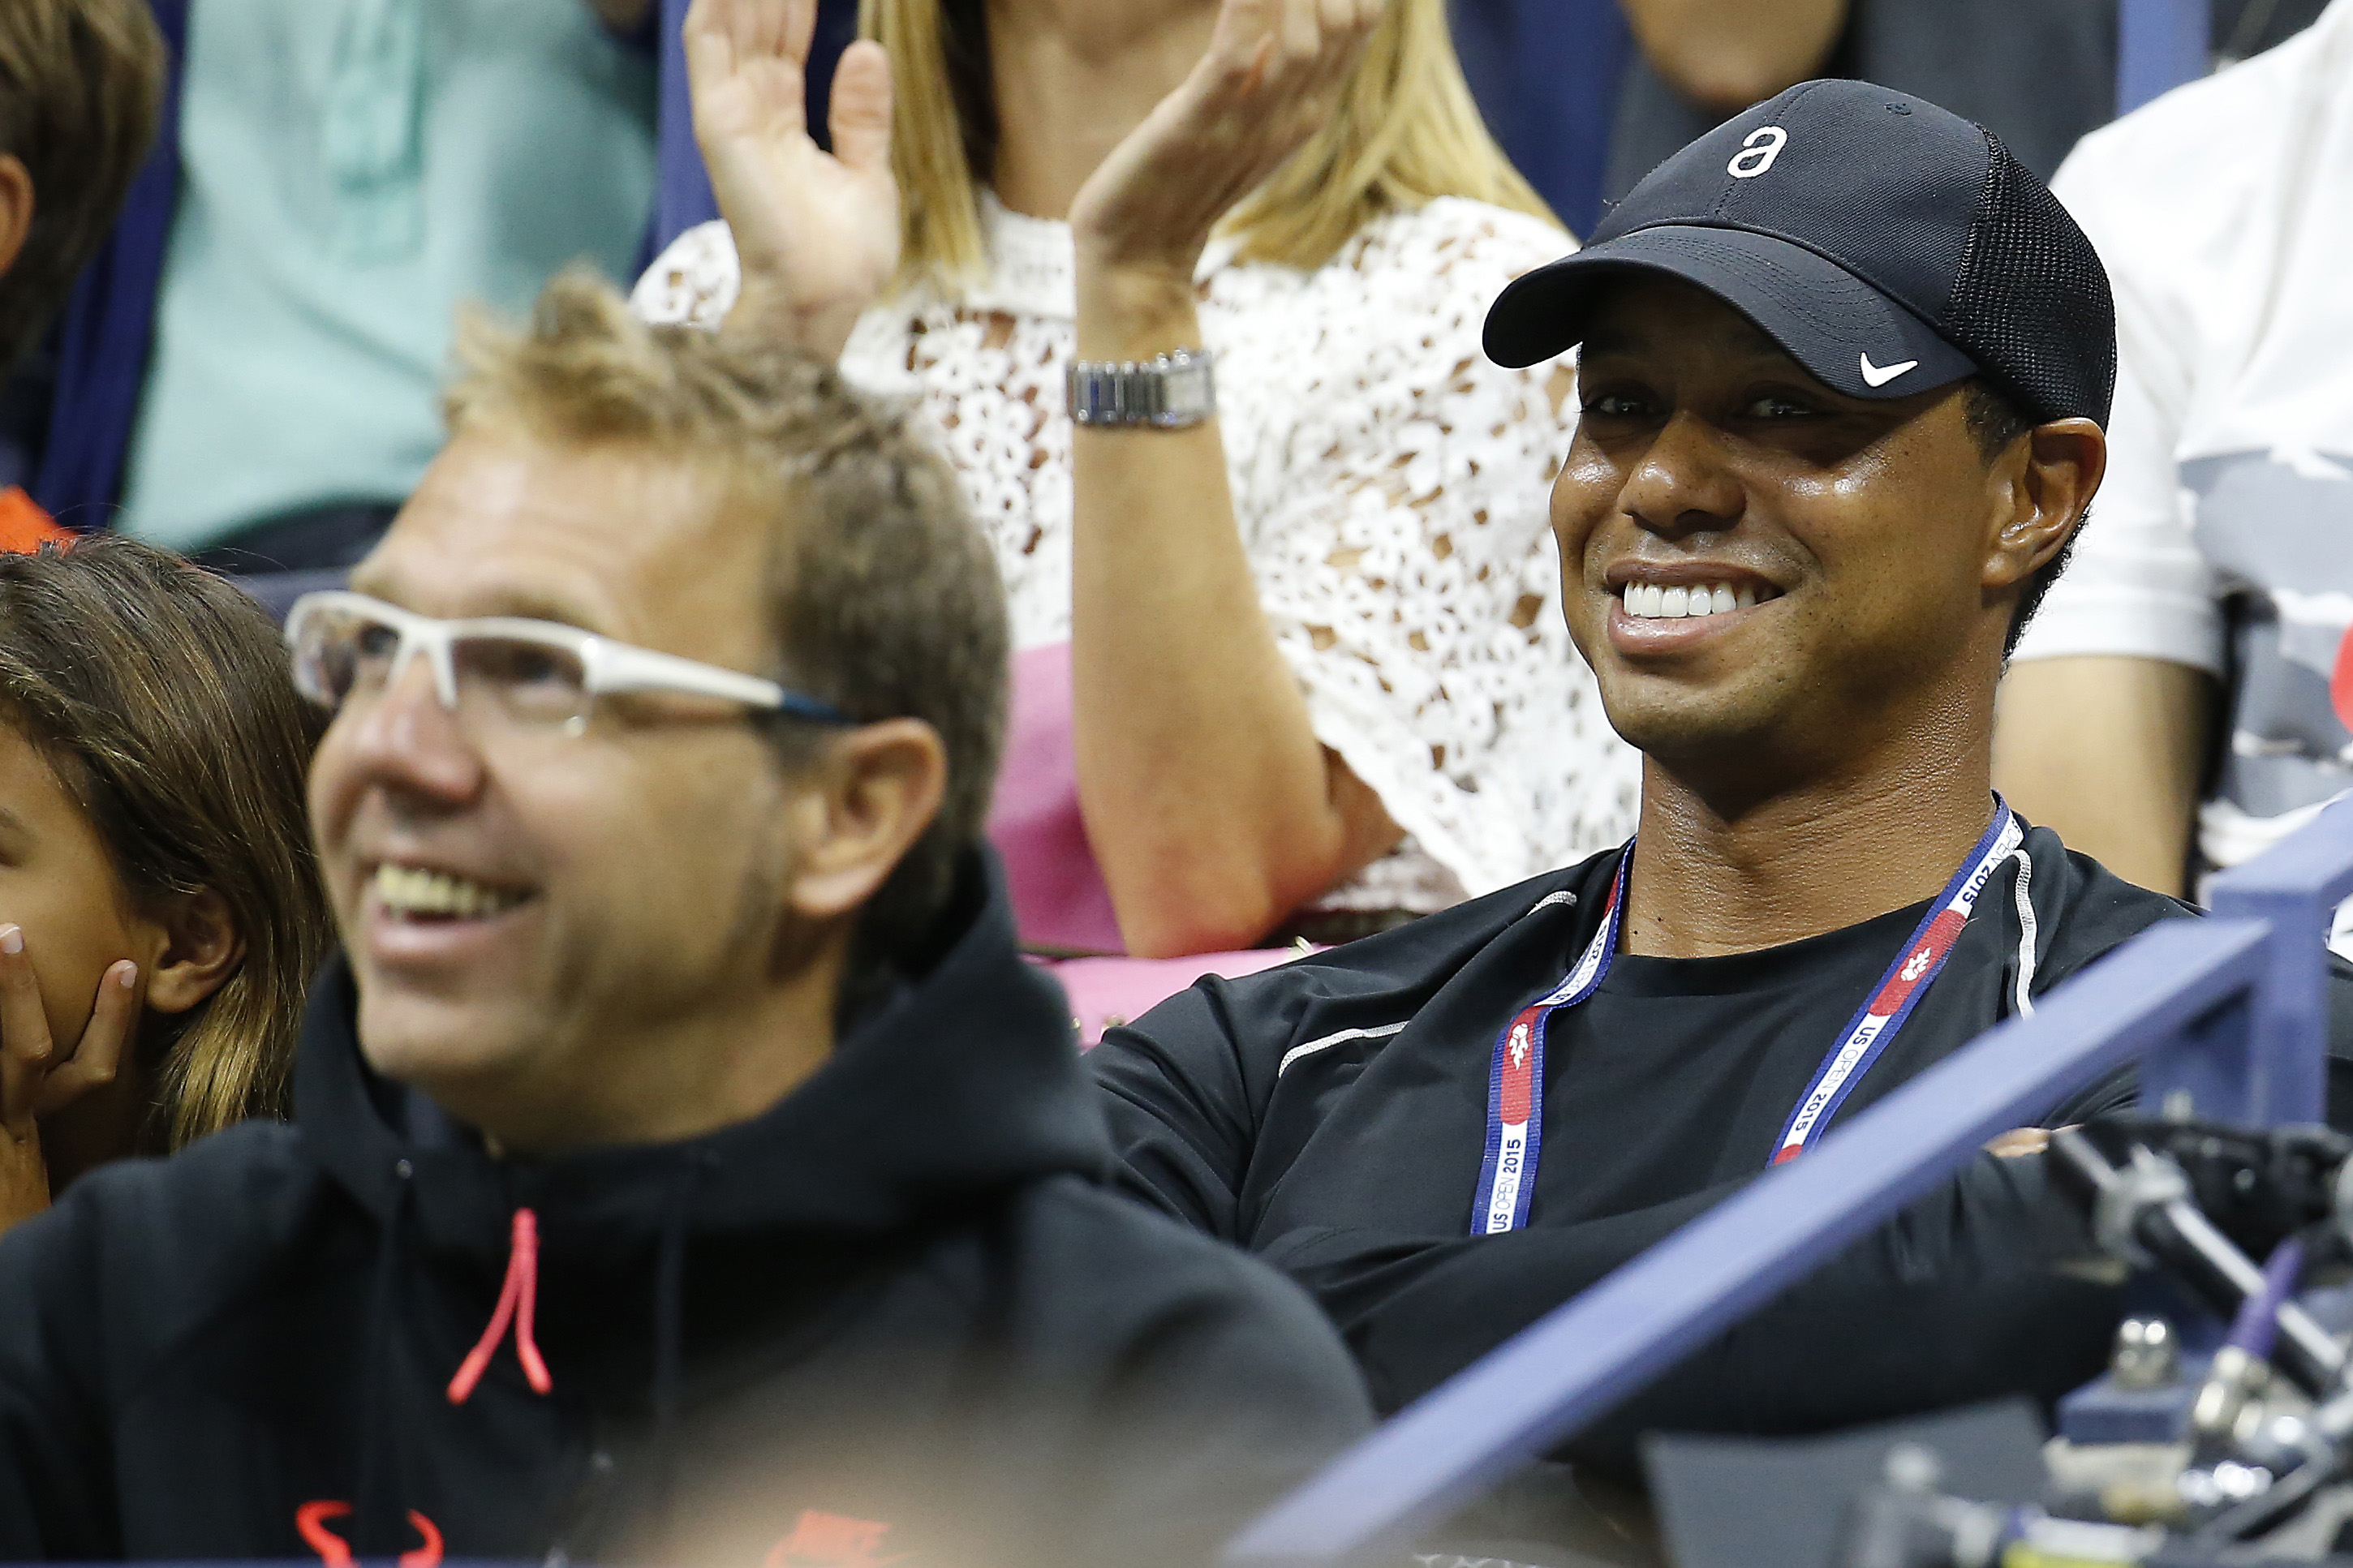 Sep 4, 2015; New York, NY, USA; PGA golfer Tiger Woods (R) watches from the player's box of Rafael Nadal of Spain (not pictured) against Fabio Fognini of Italy (not pictured) on day five of the 2015 U.S. Open tennis tournament at USTA Billie Jean King National Tennis Center. Mandatory Credit: Geoff Burke-USA TODAY Sports